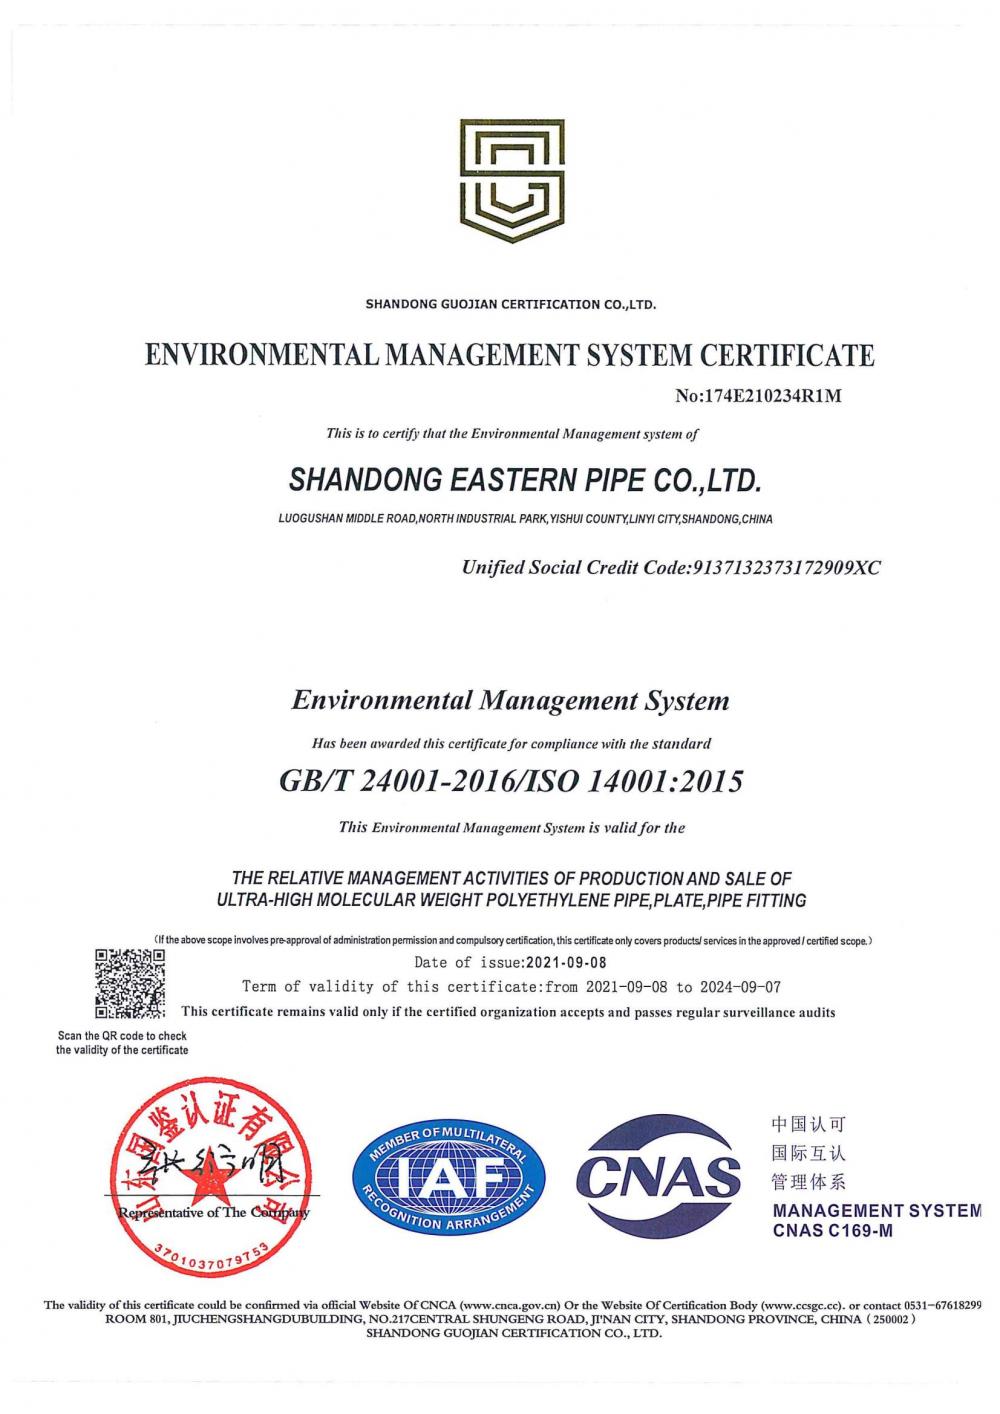 Certification of the company's environmental management system